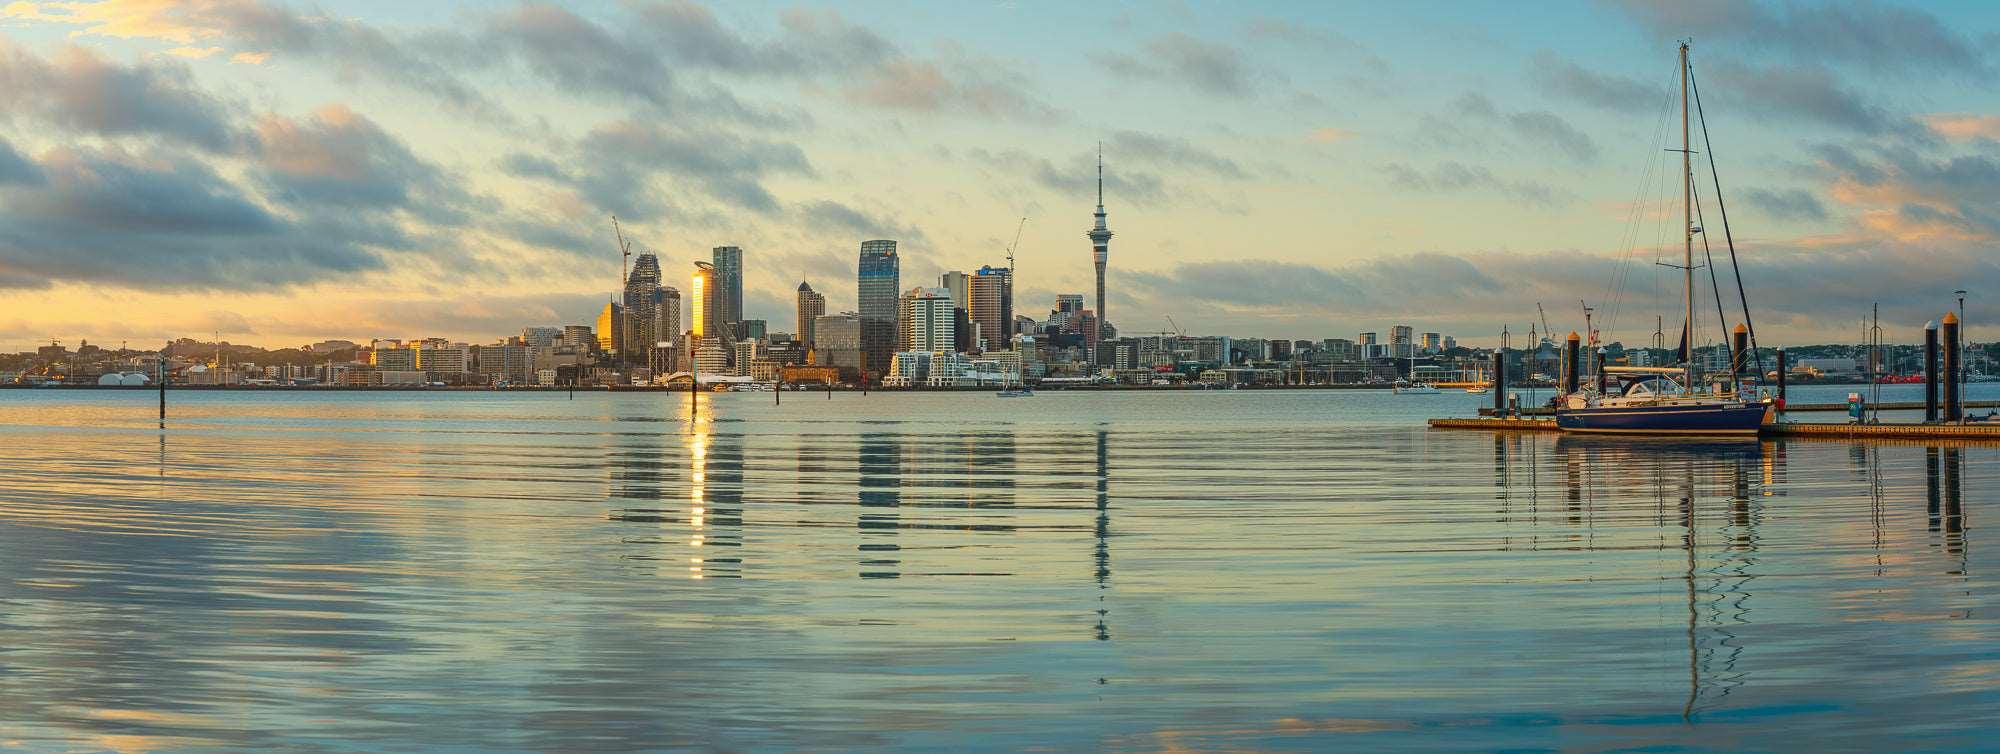 New Zealand Location Scouting Services for Filmmakers and Content Creators - Stephen Milner